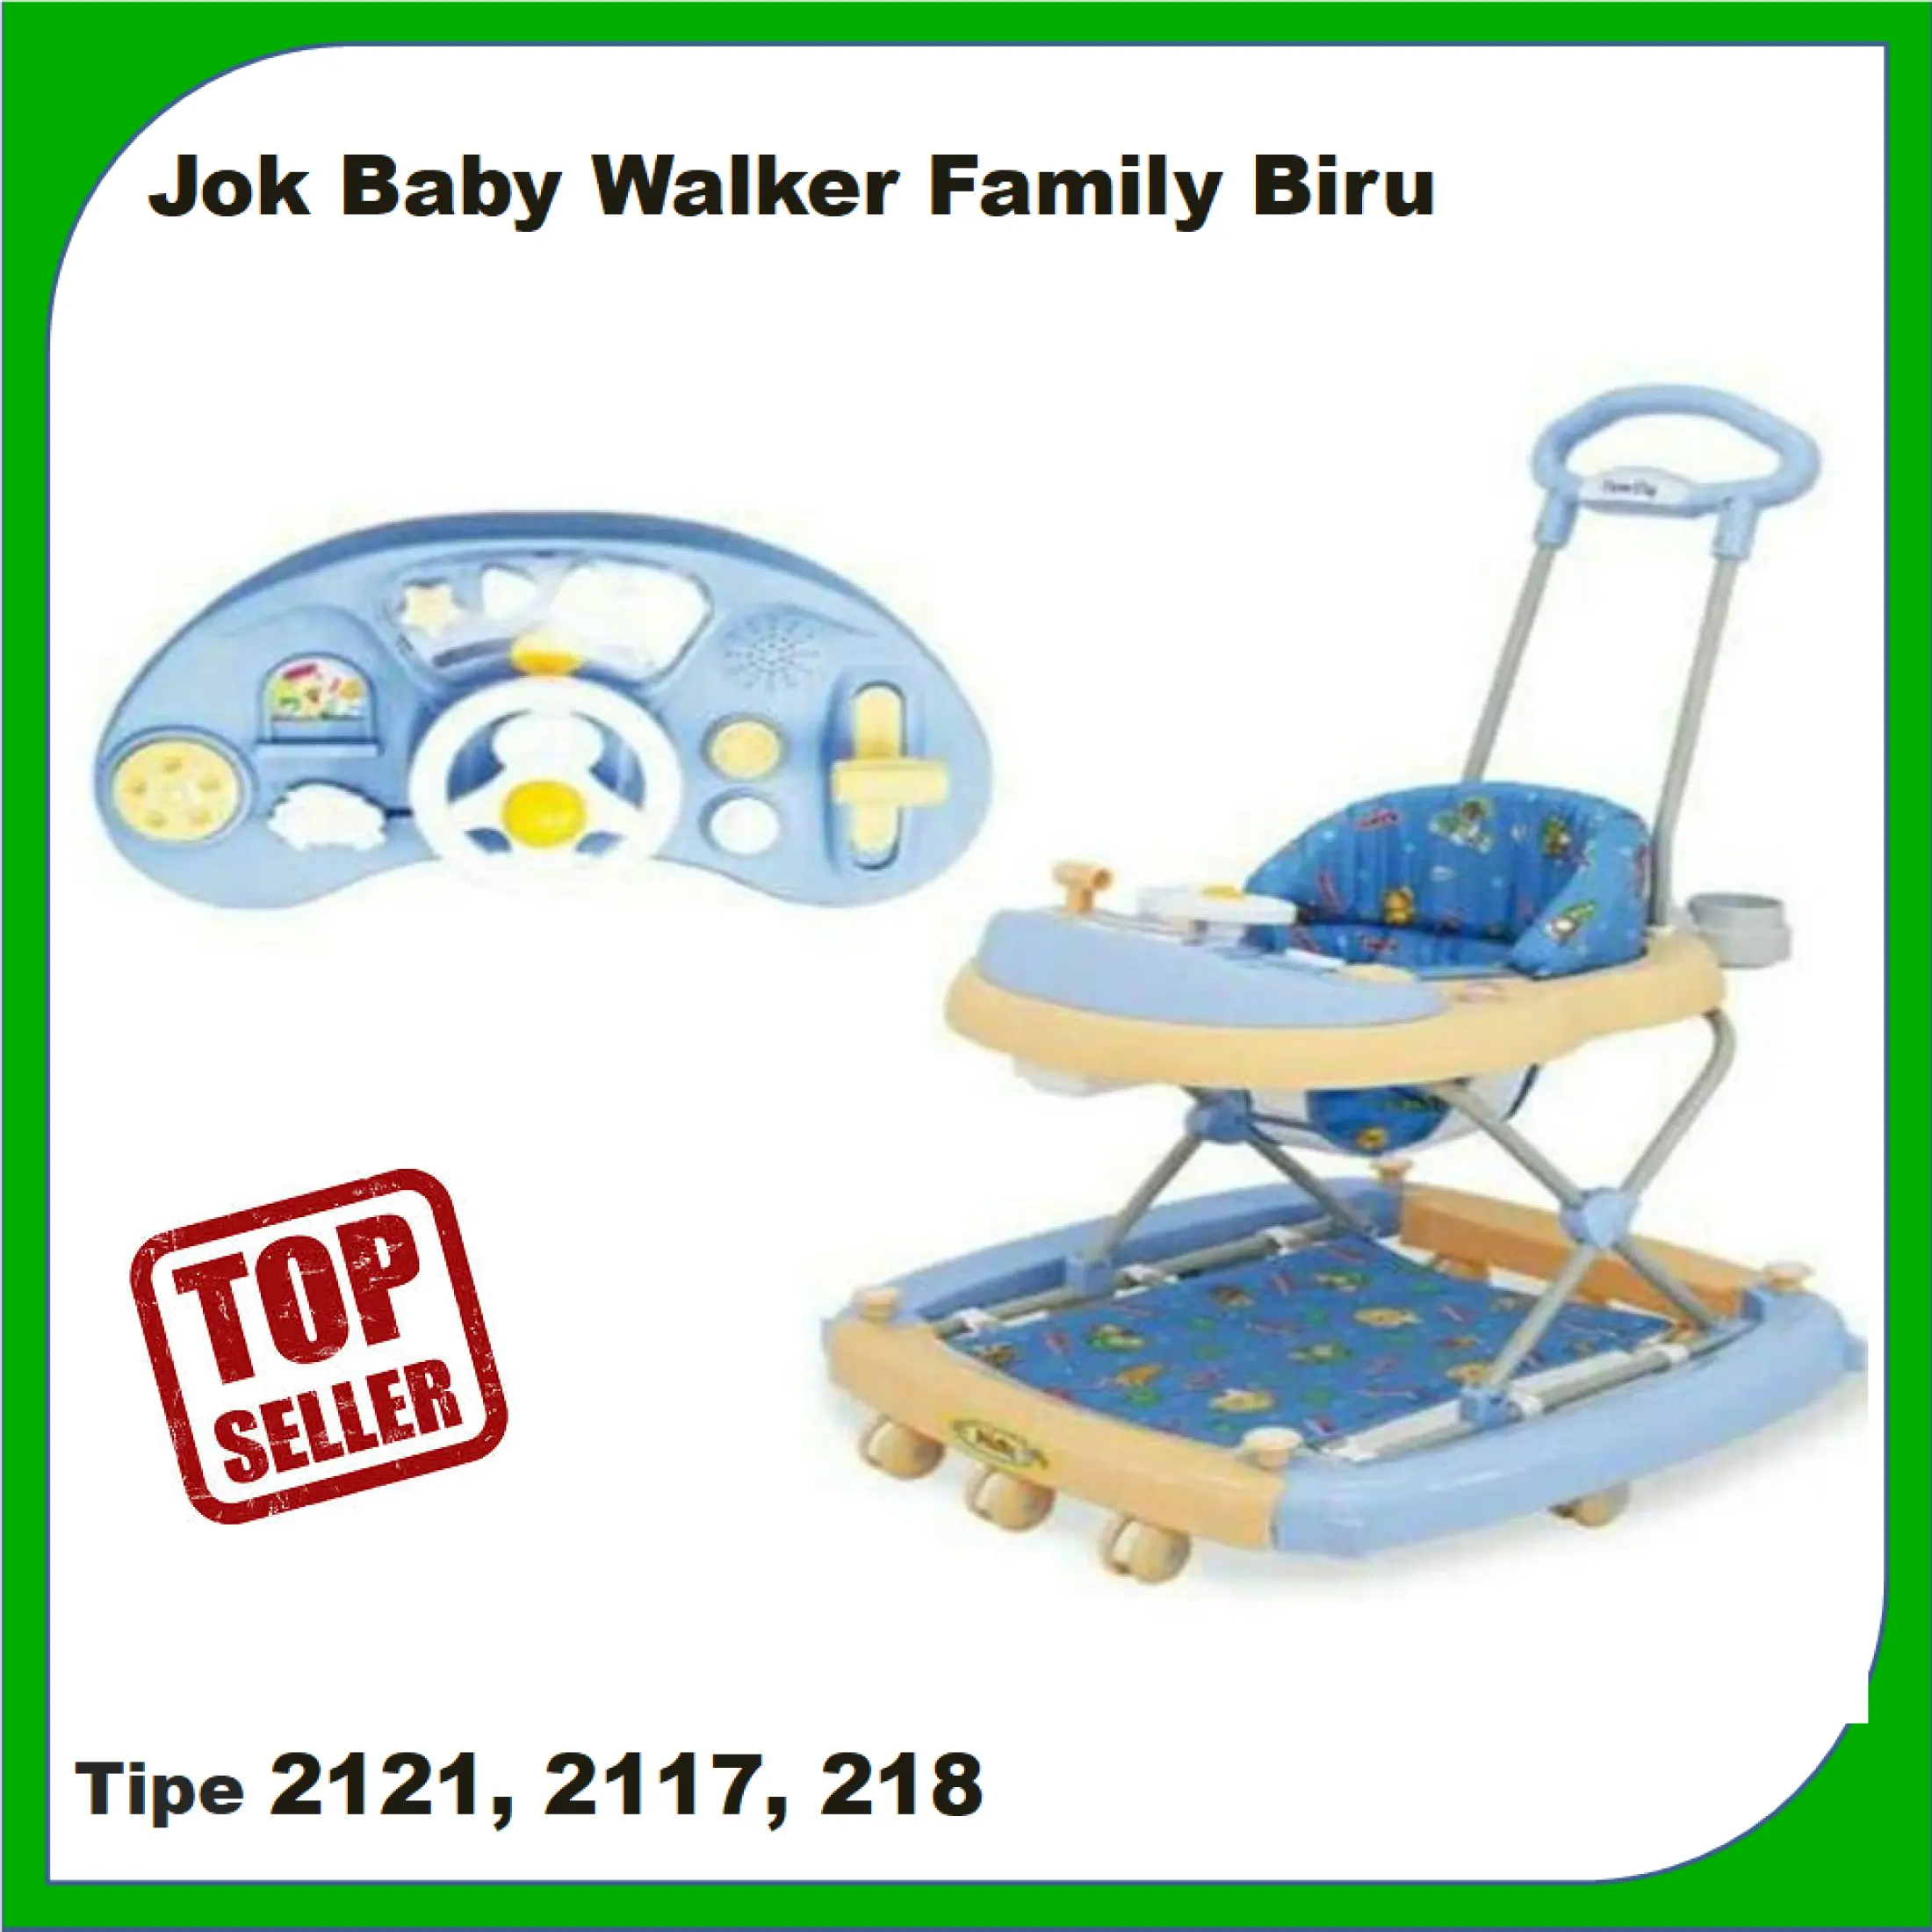 35++ Baby walker family 1817 information